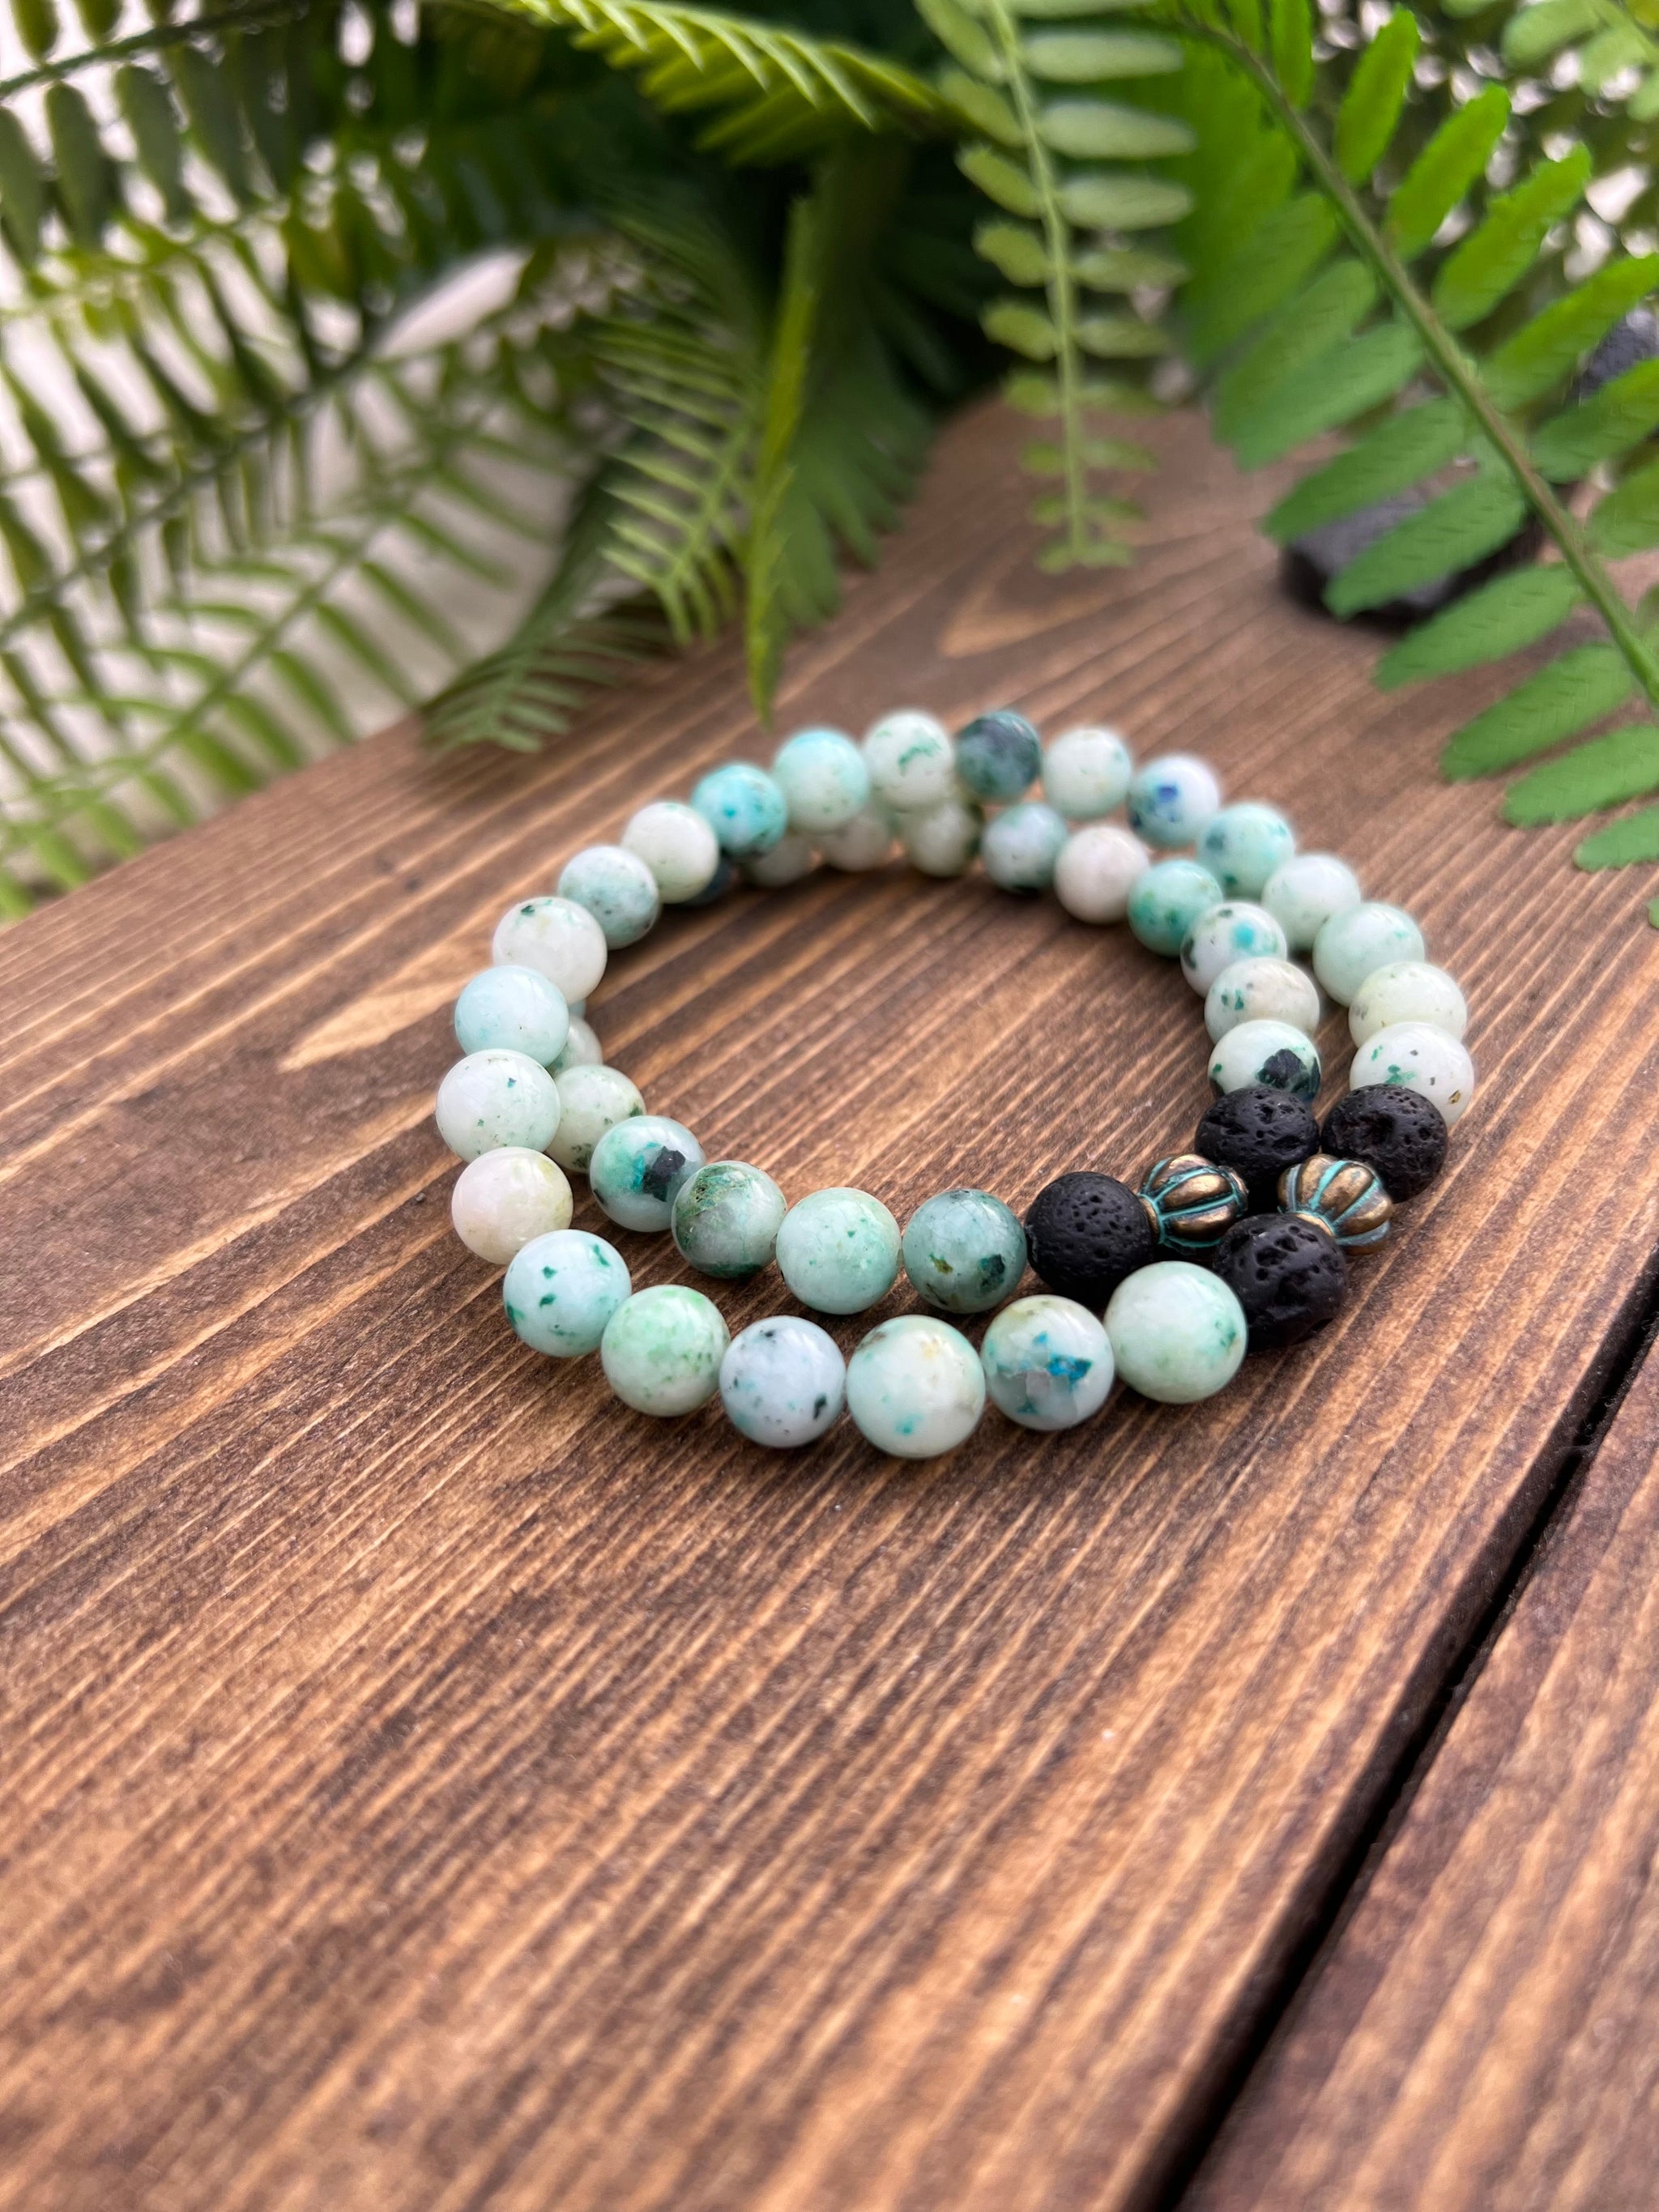 How to Make an Essential Oil Diffuser Bracelet